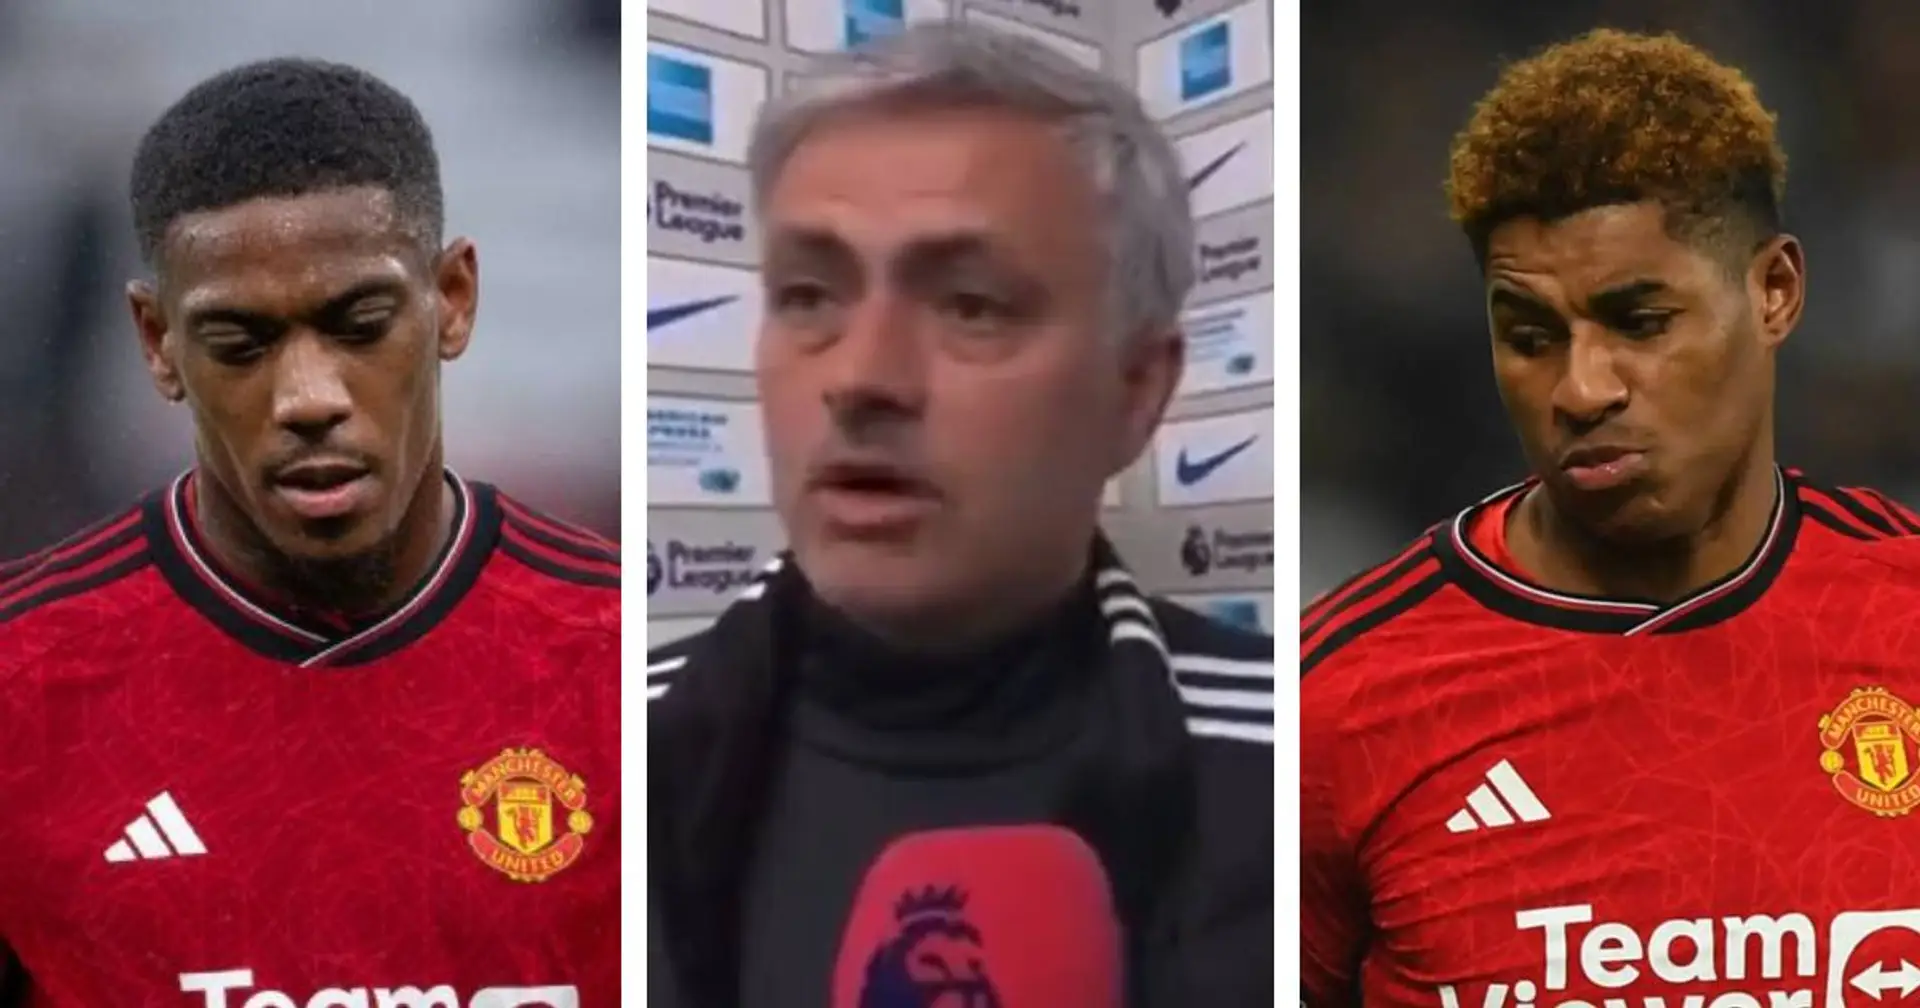 'Now you know why': Jose Mourinho's comments about Rashford, Martial re-emerge after Newcastle defeat 